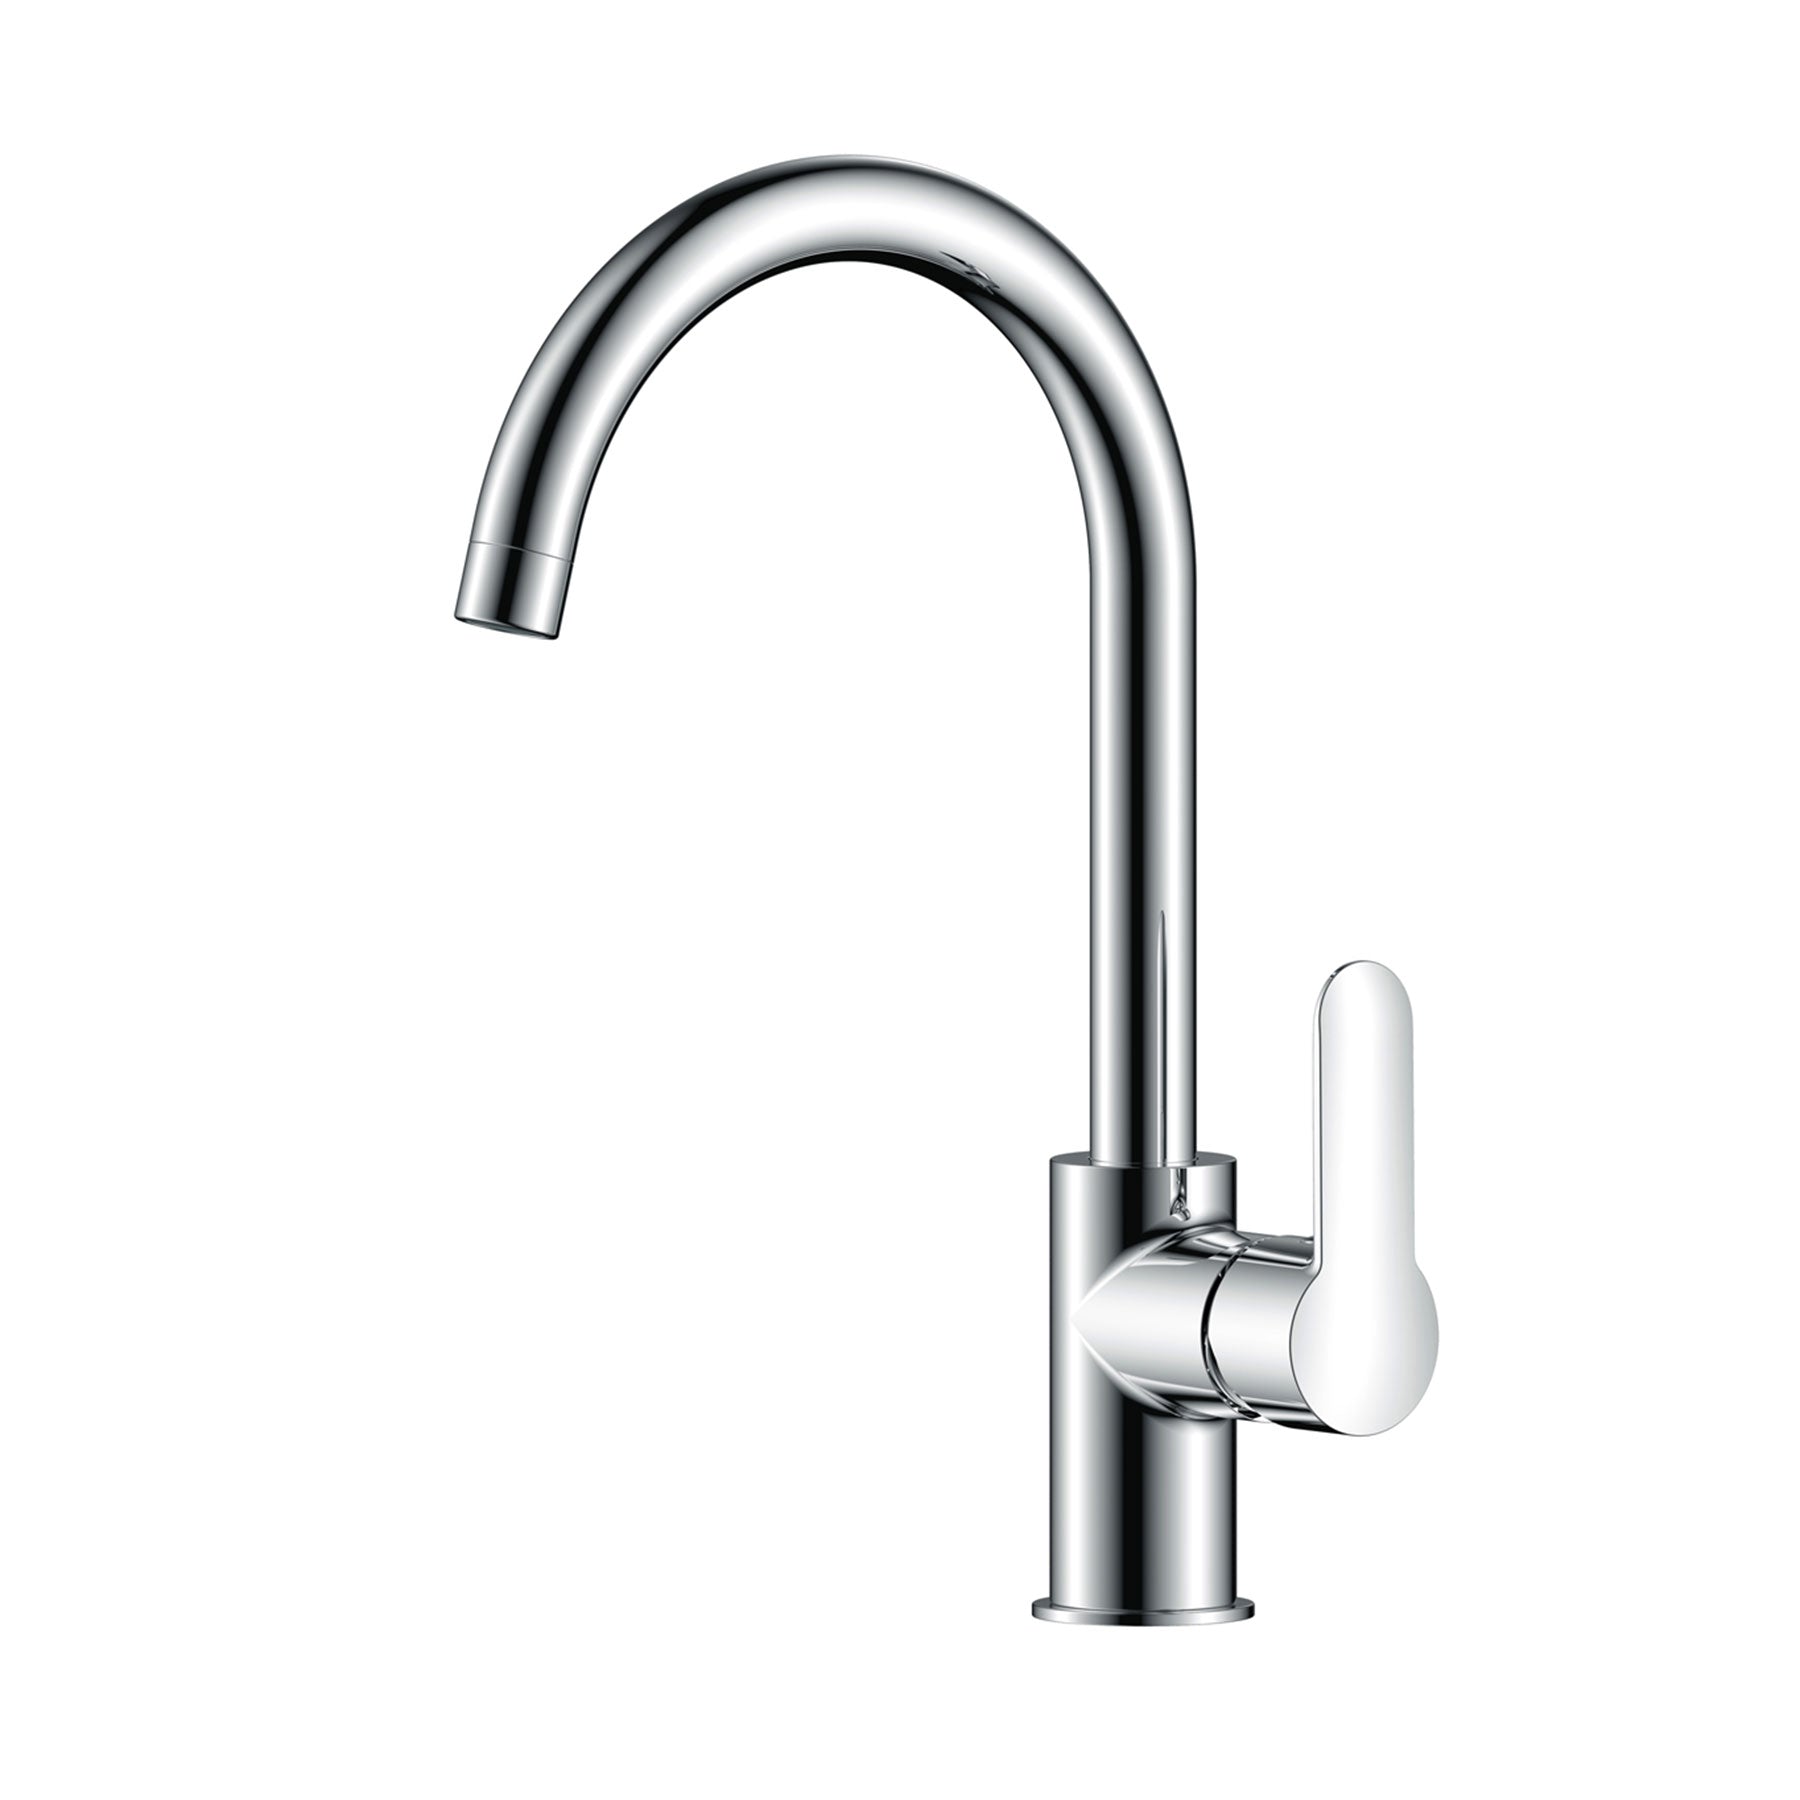 Kitchen Mixer Tap with Single Lever Tap Design - Chrome Finish